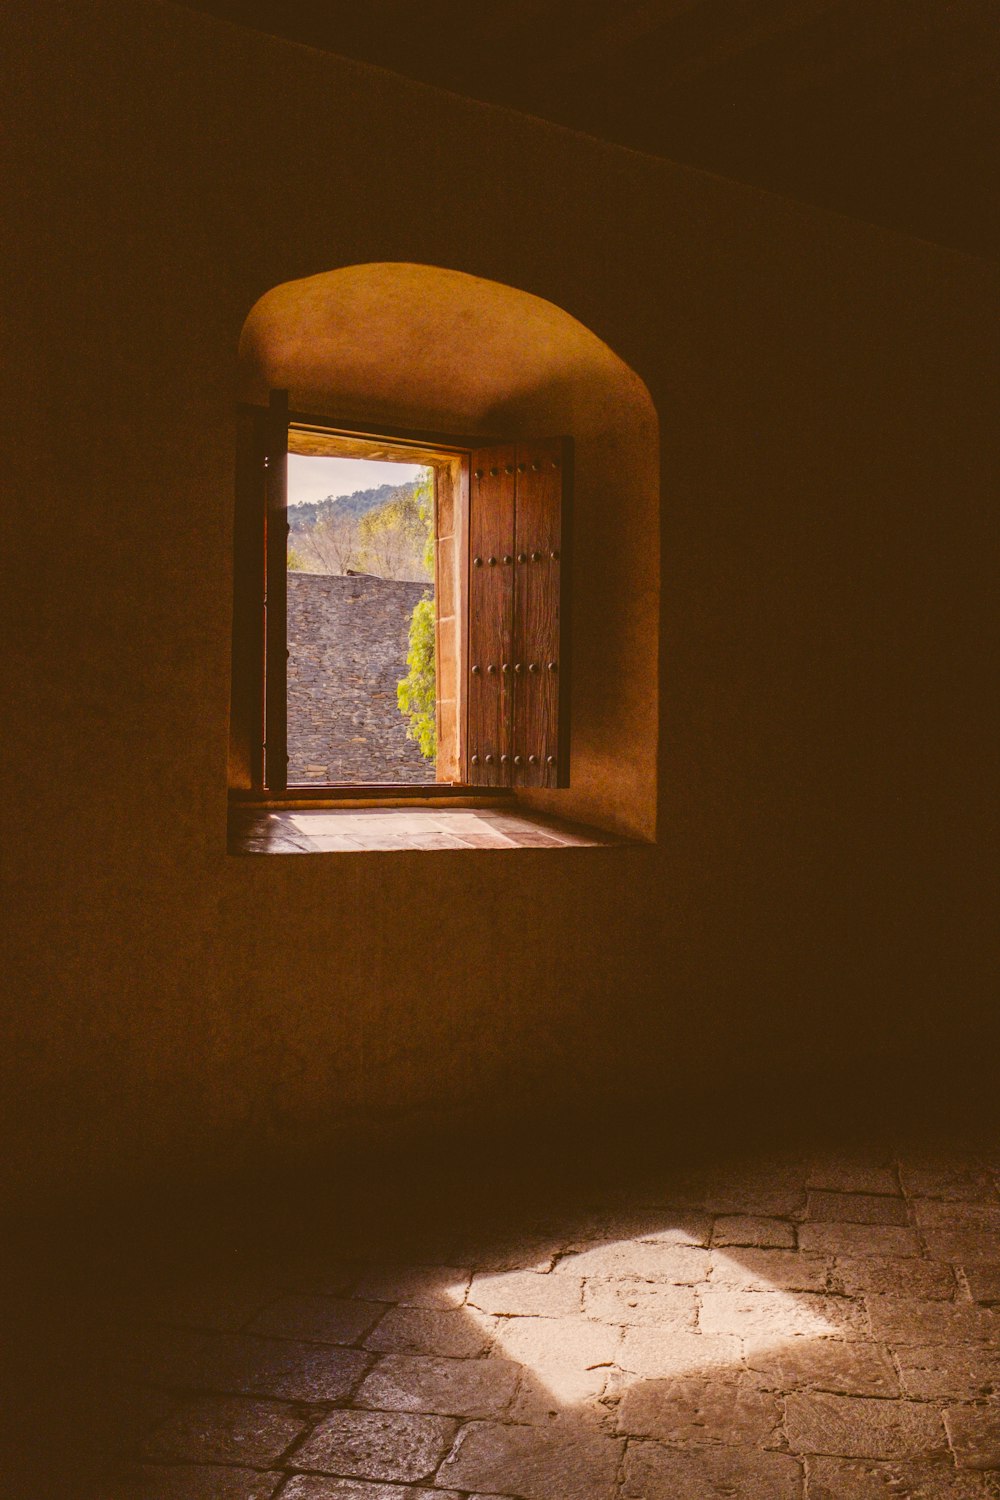 an open window with a view of a mountain